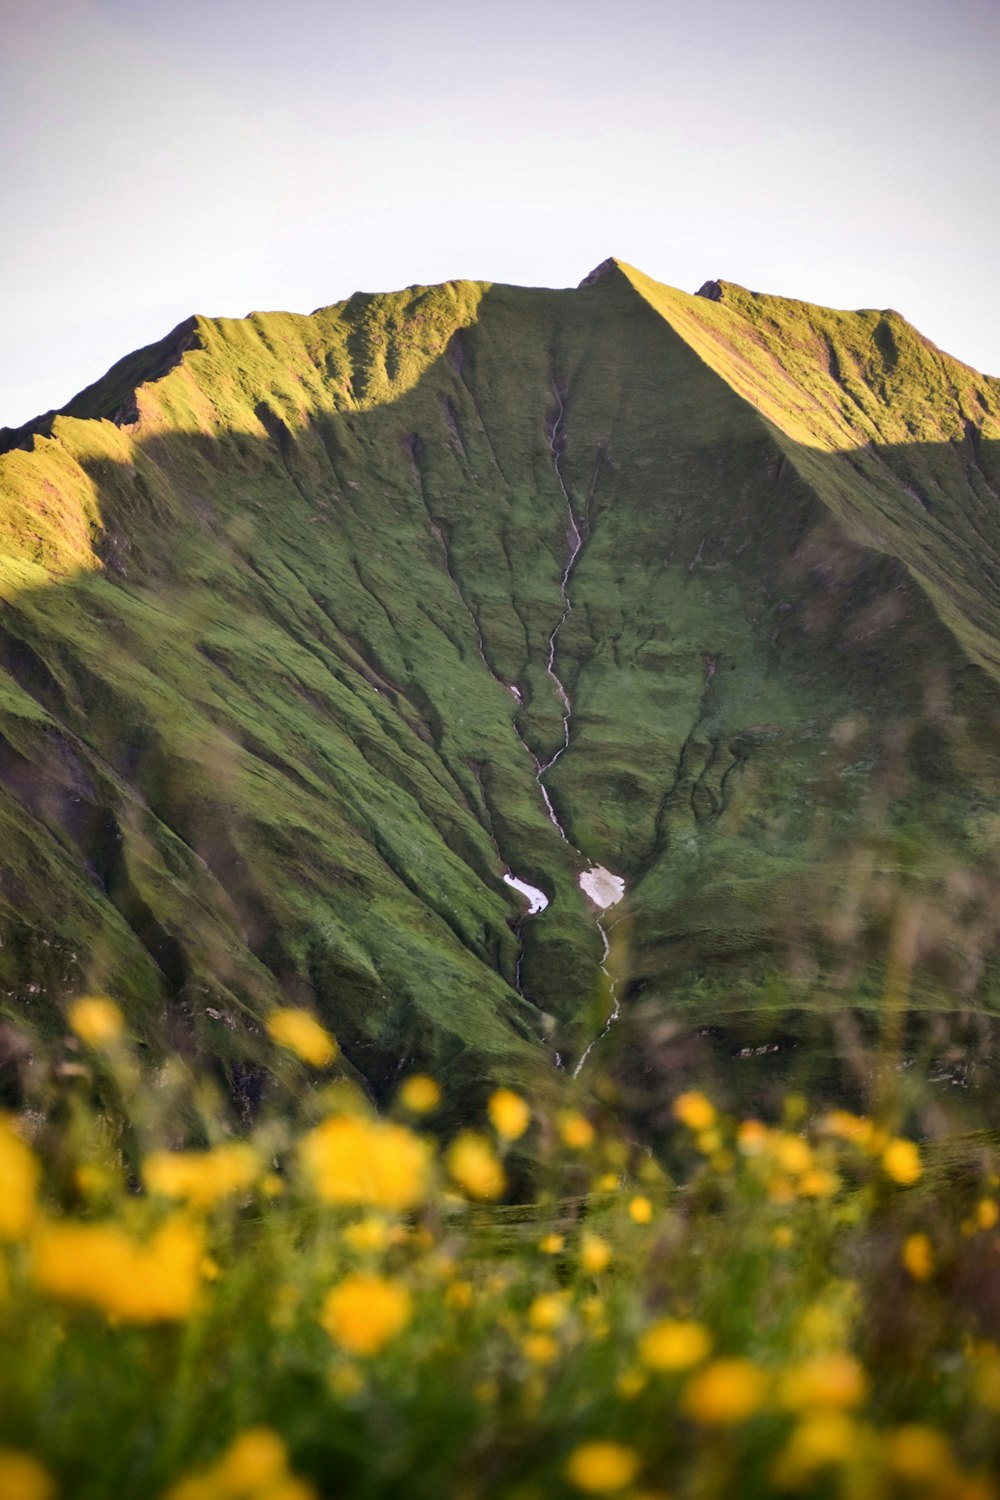 a view of a green mountain with yellow flowers in the foreground